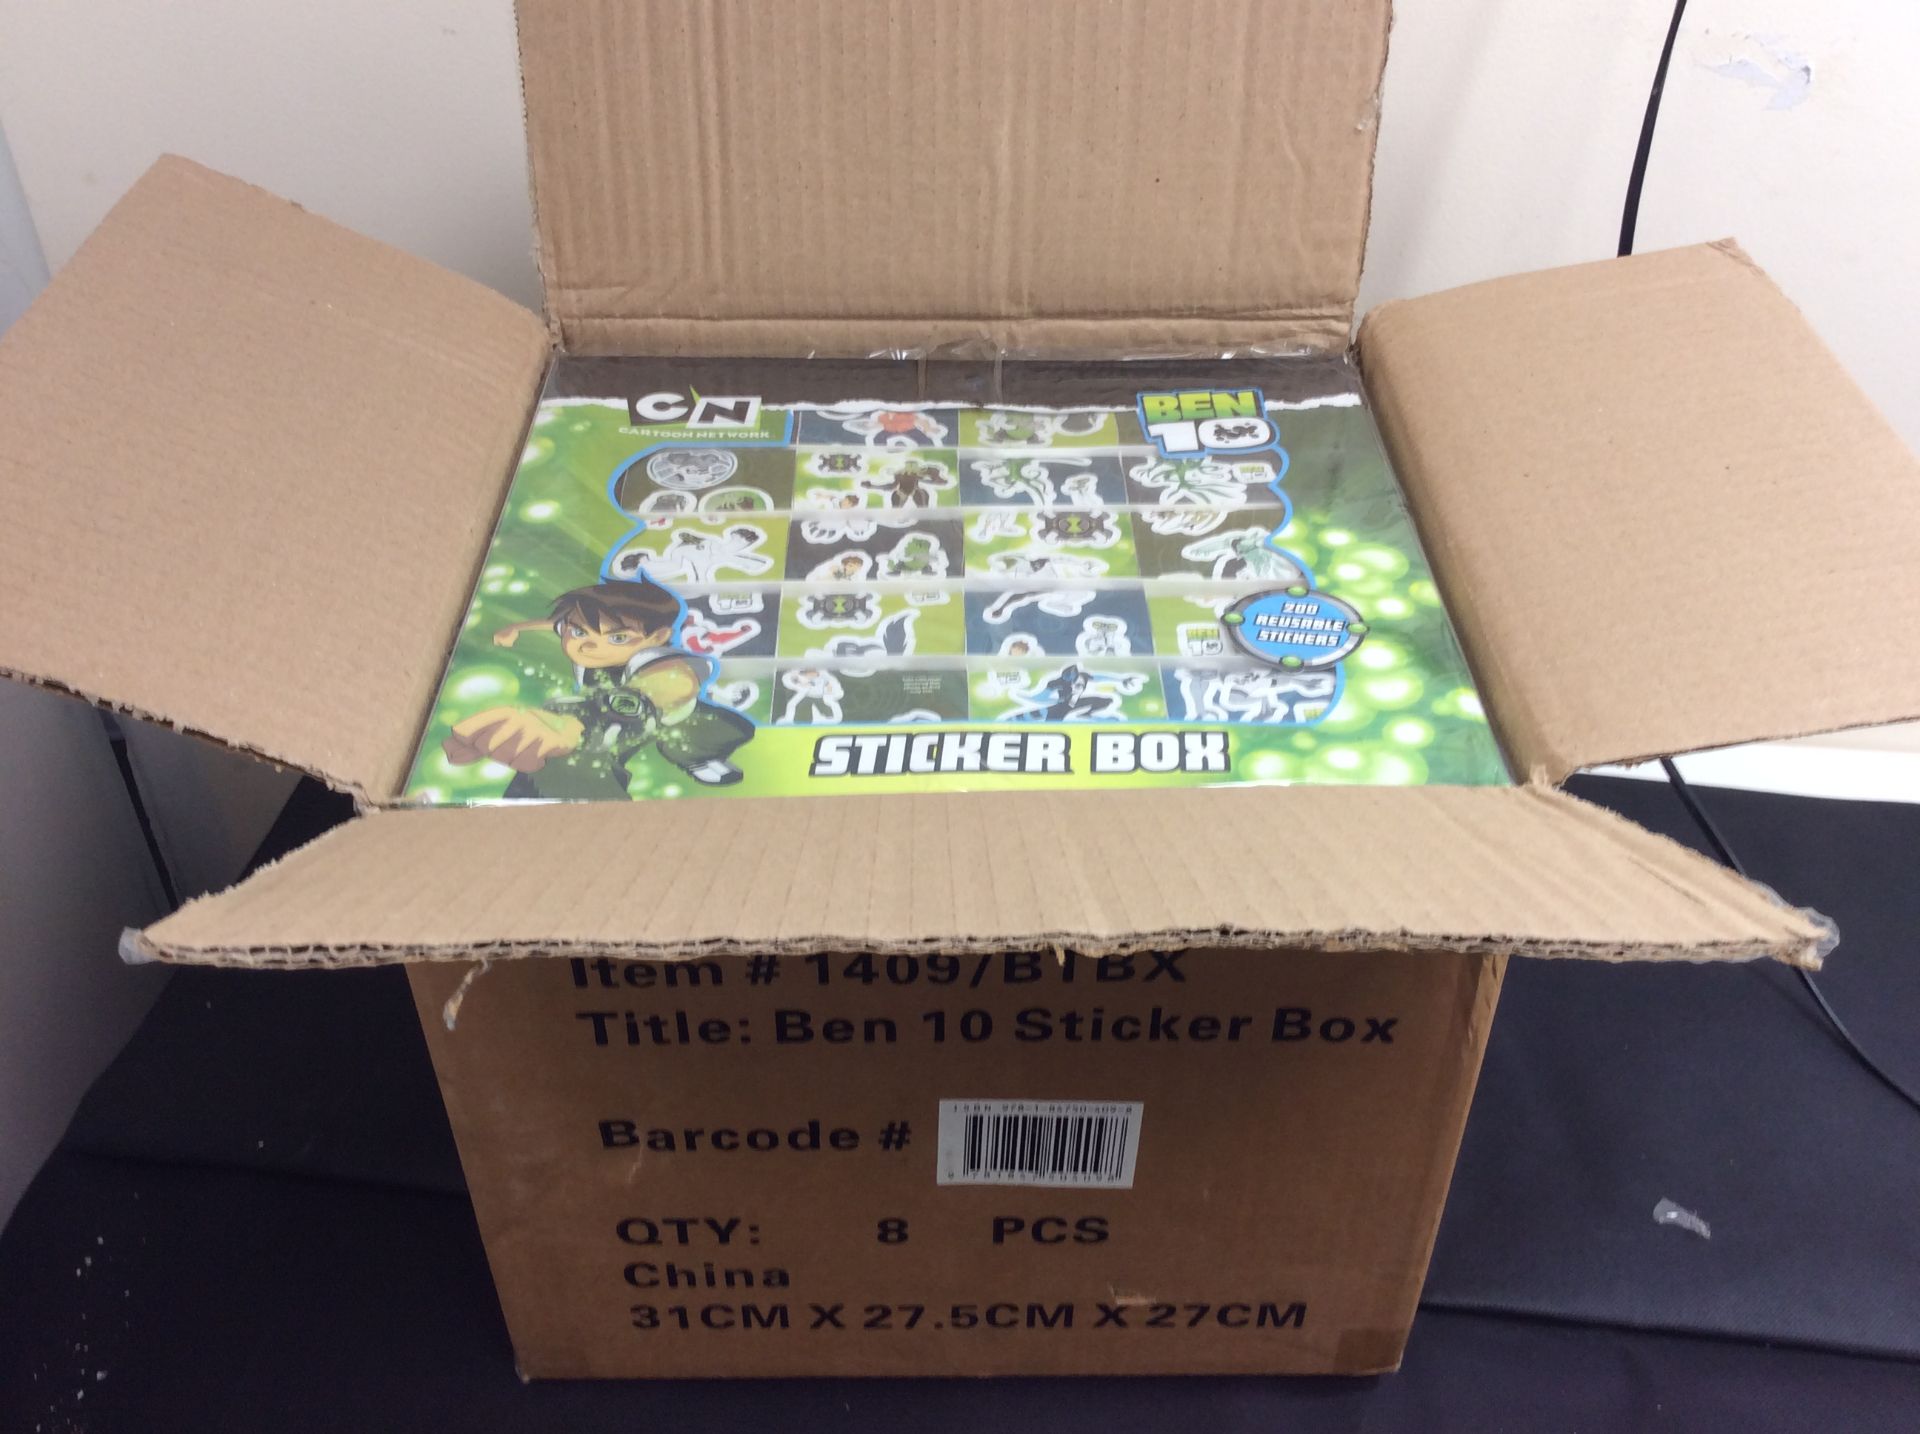 new stock box of 8 ben10 sticker boxes containing 200 reuseable stickers - Image 2 of 2